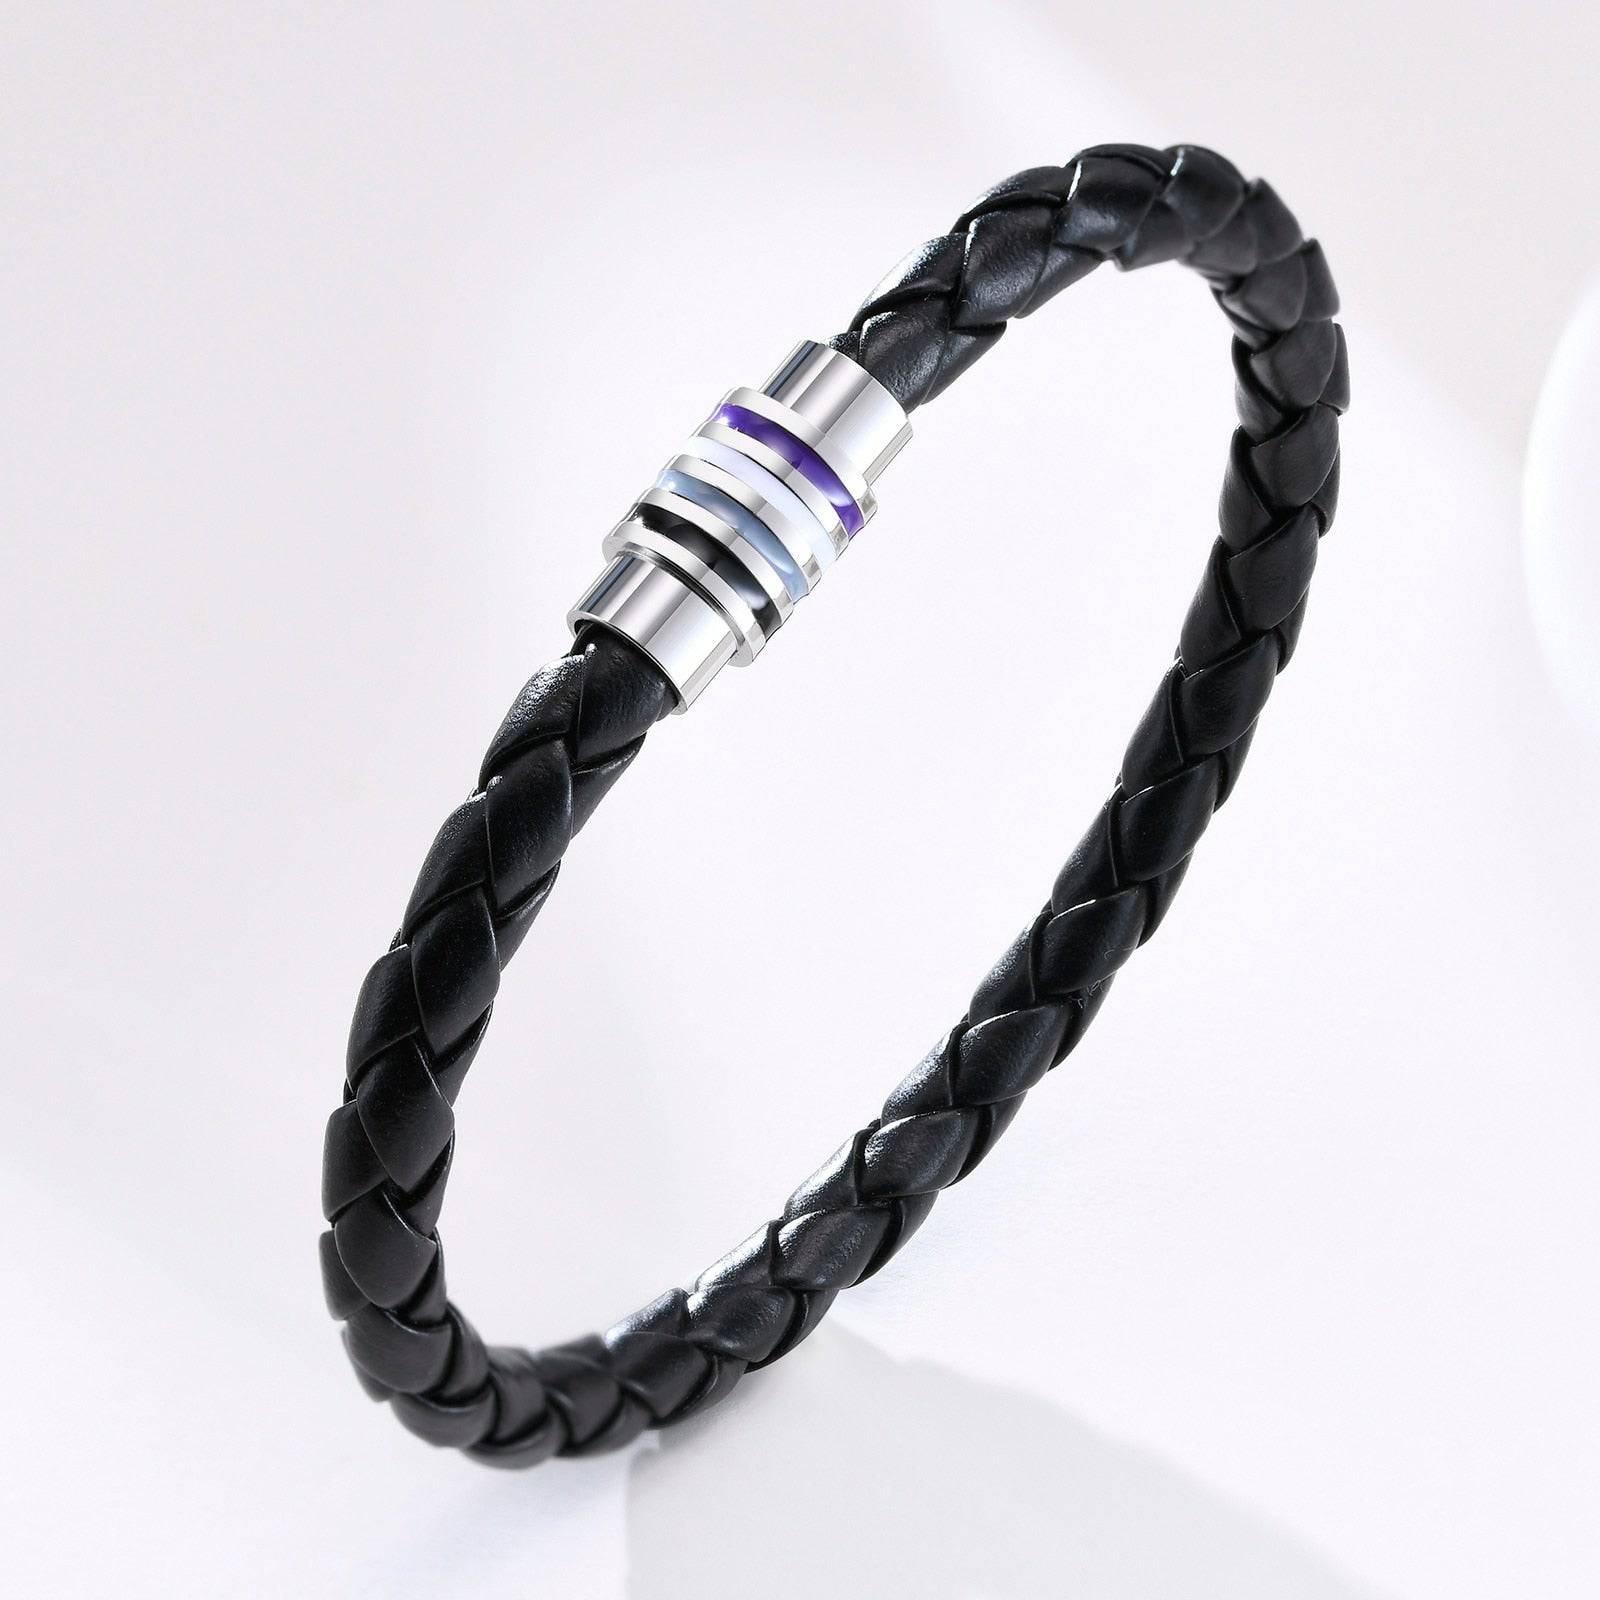 Ace Asexual Braided Stainless Steel Bracelet